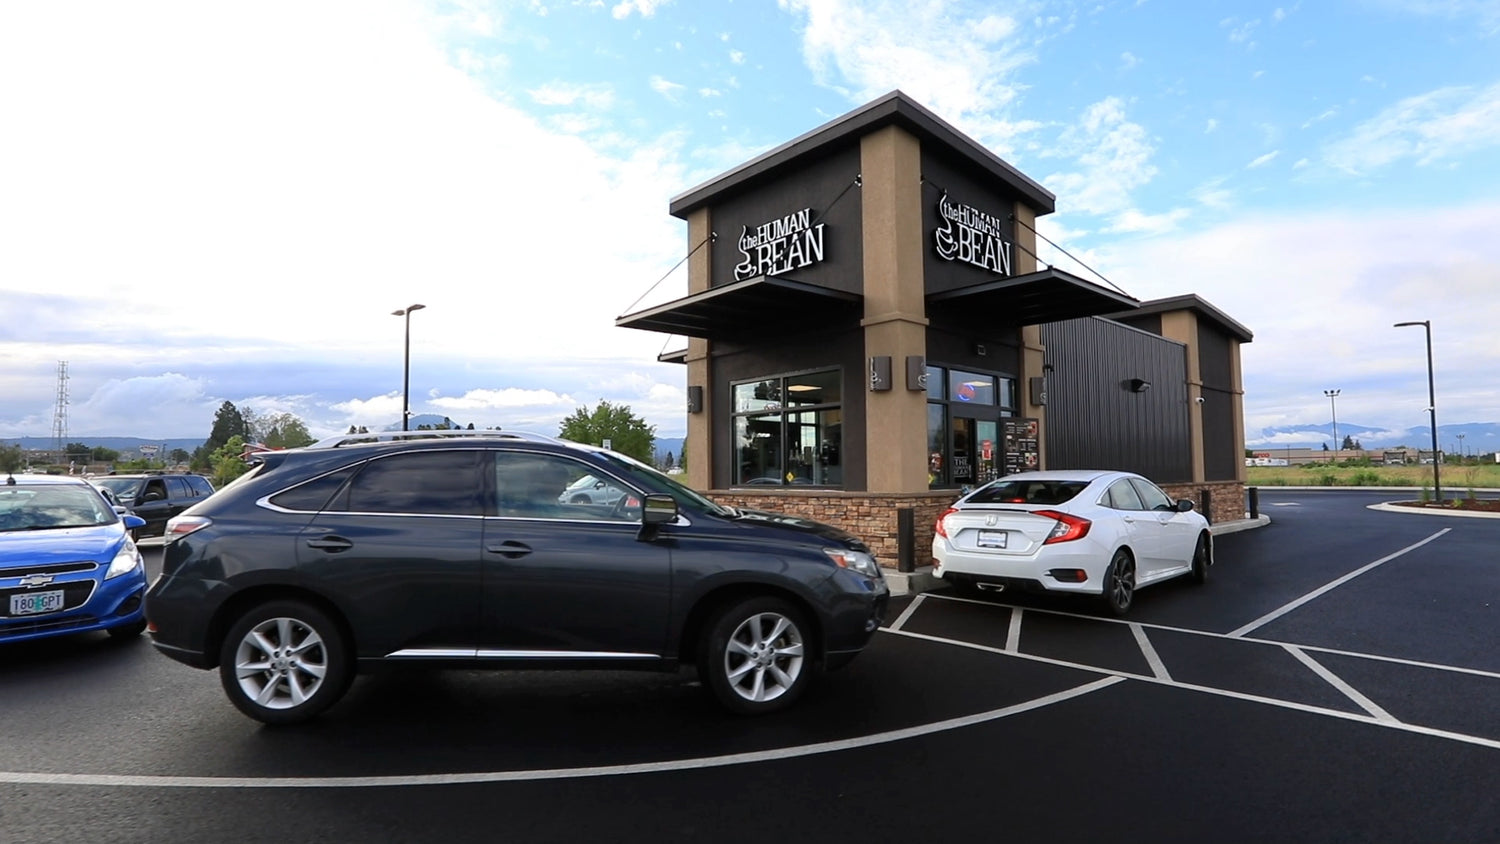 The Human Bean Coffee Drive Thru Store with Cars